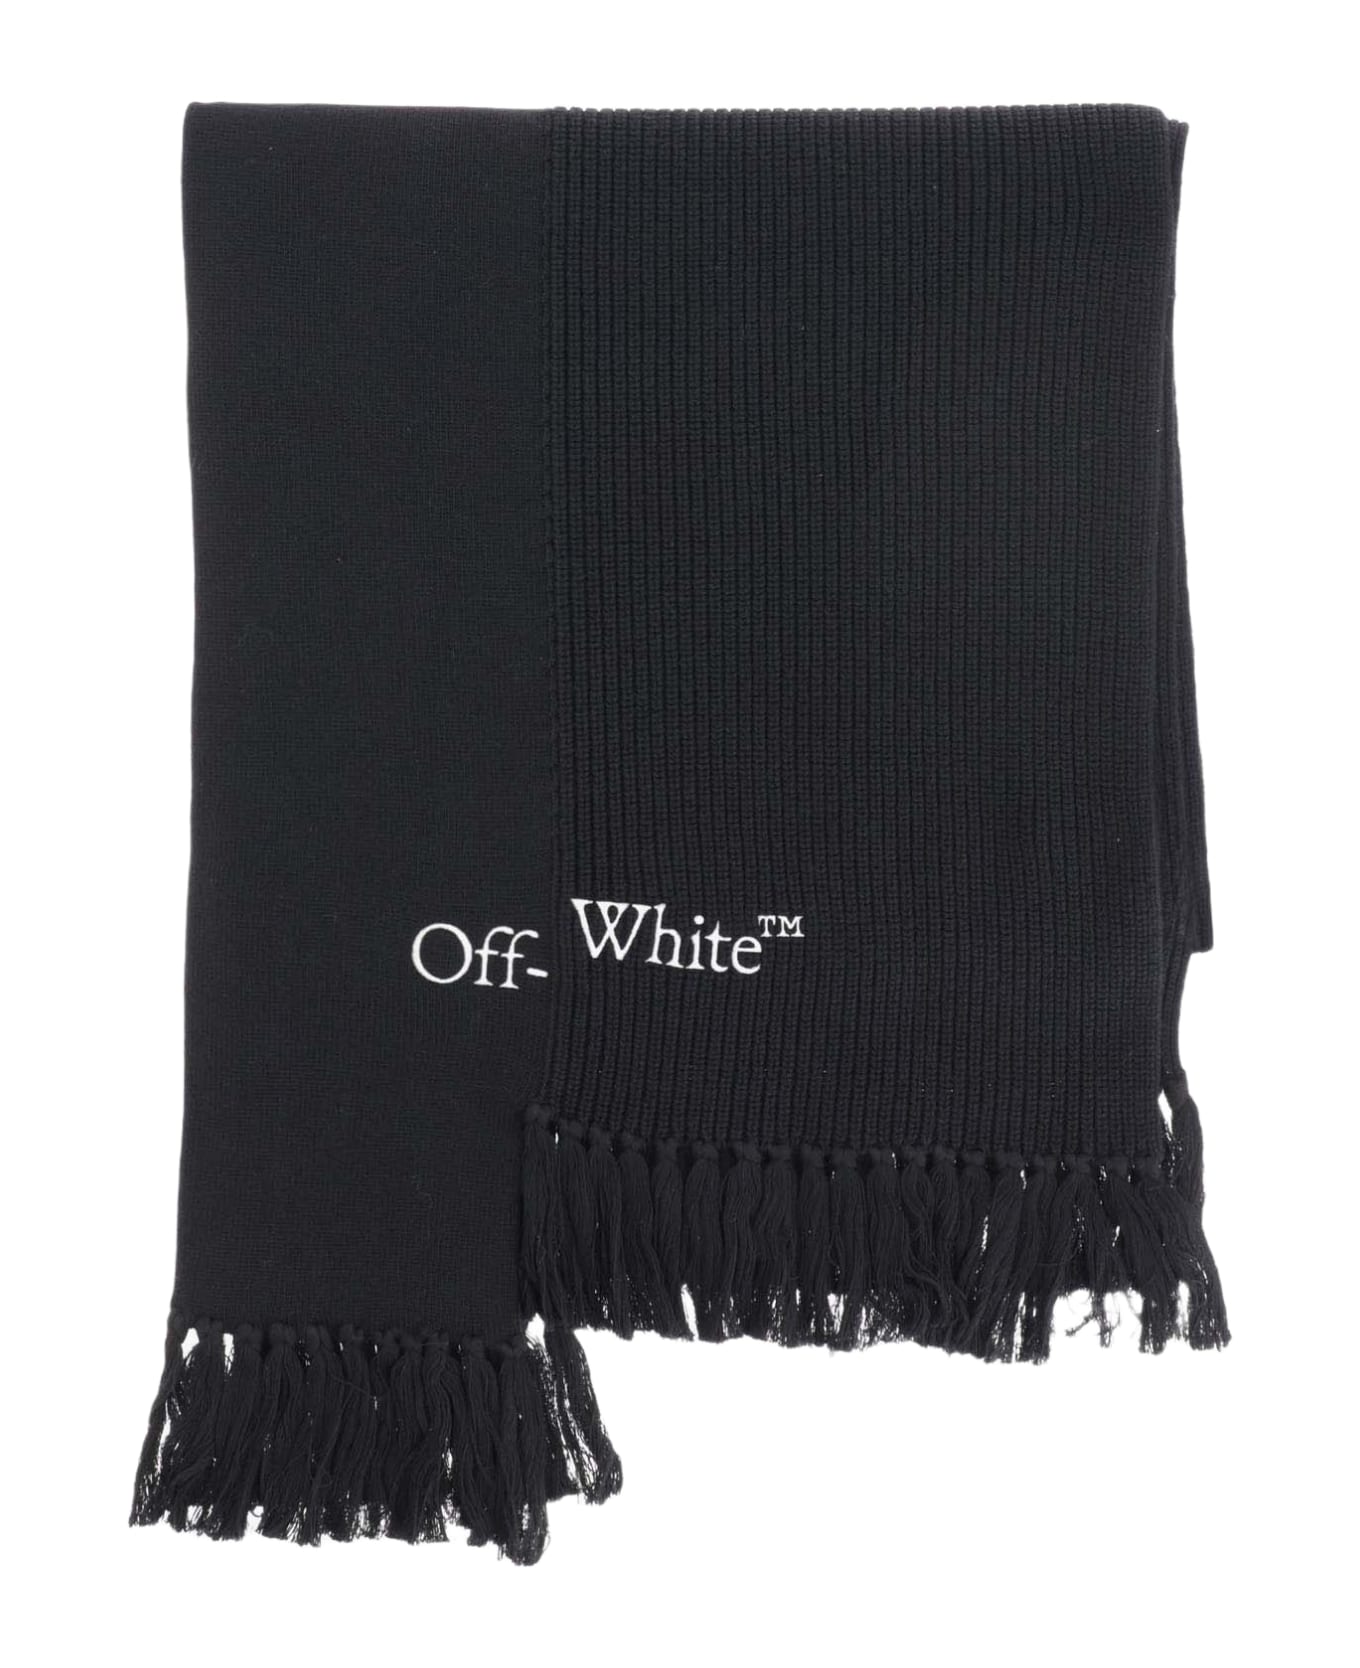 Off-White Asymmetrical Cotton And Cashmere Blend Scarf - Black